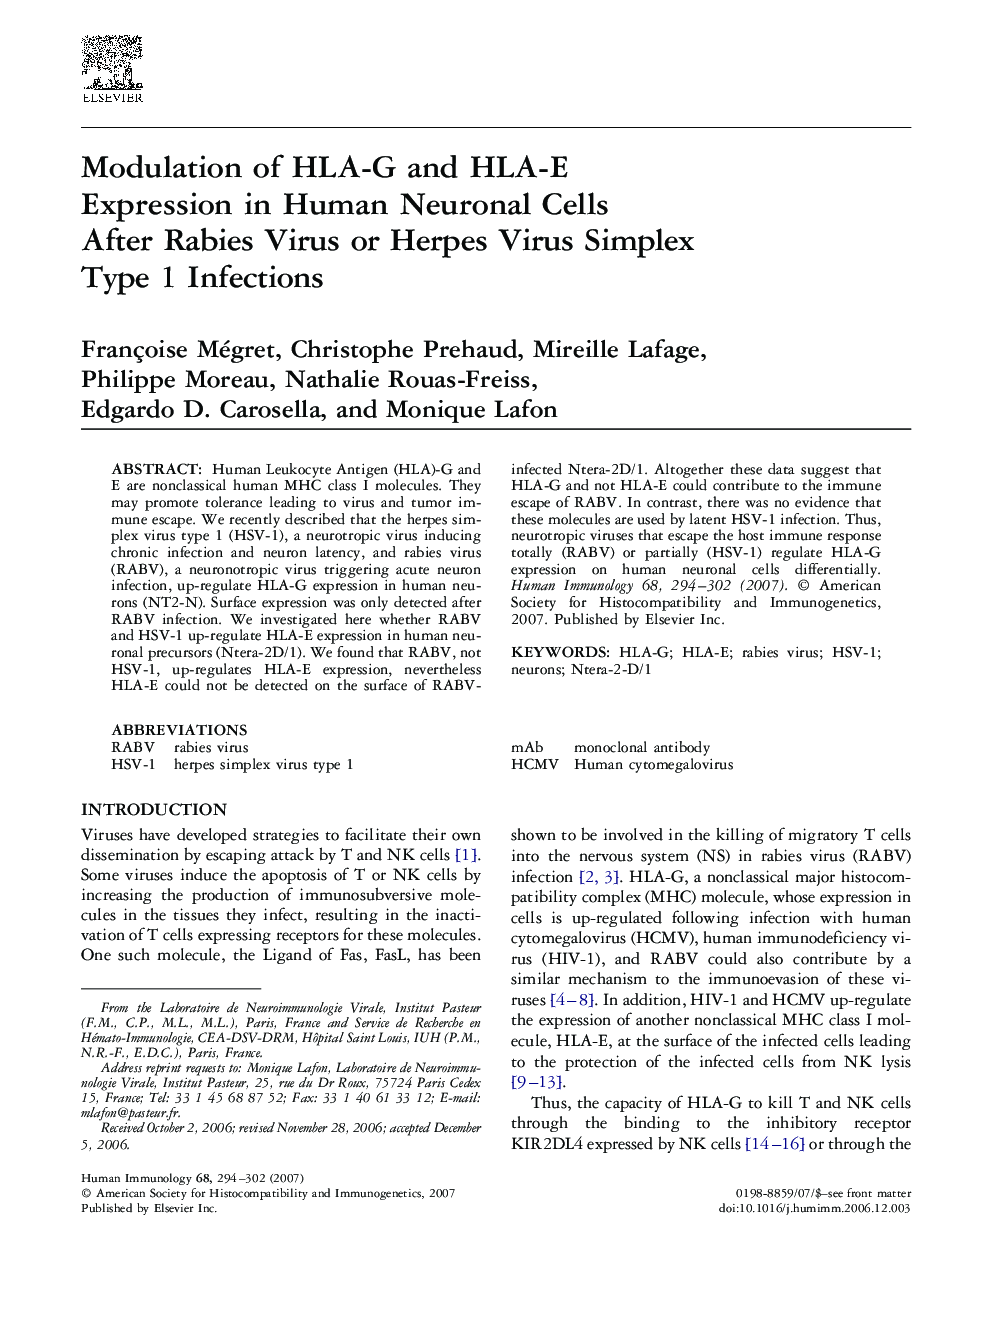 Modulation of HLA-G and HLA-E Expression in Human Neuronal Cells After Rabies Virus or Herpes Virus Simplex Type 1 Infections